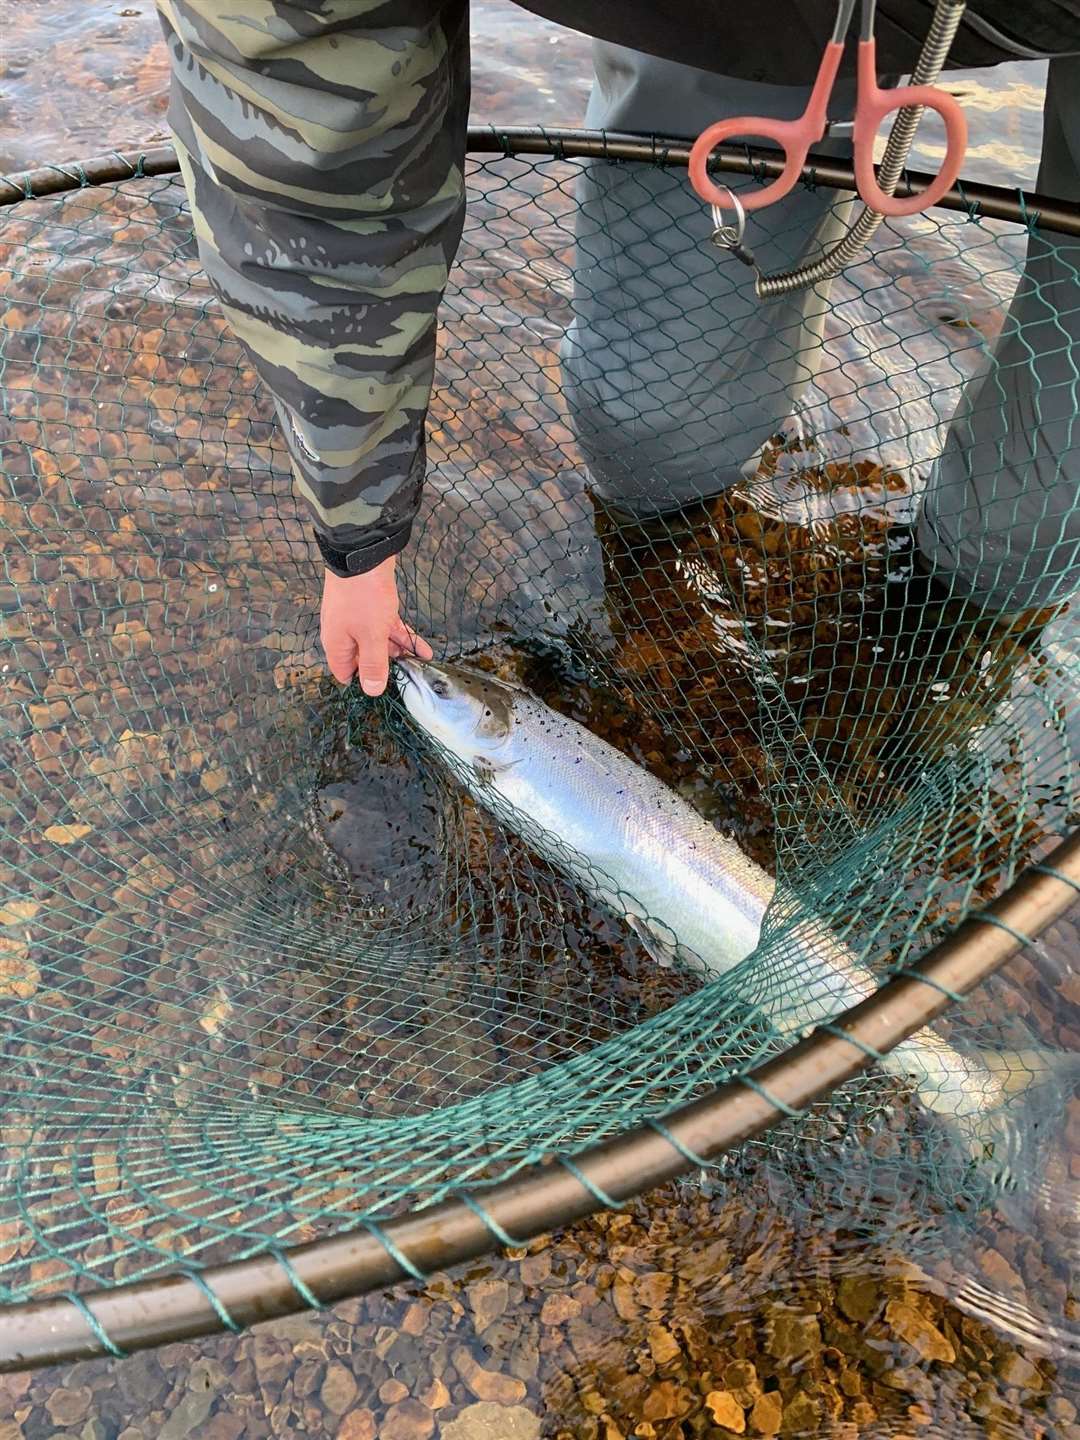 A spring salmon about to be released.